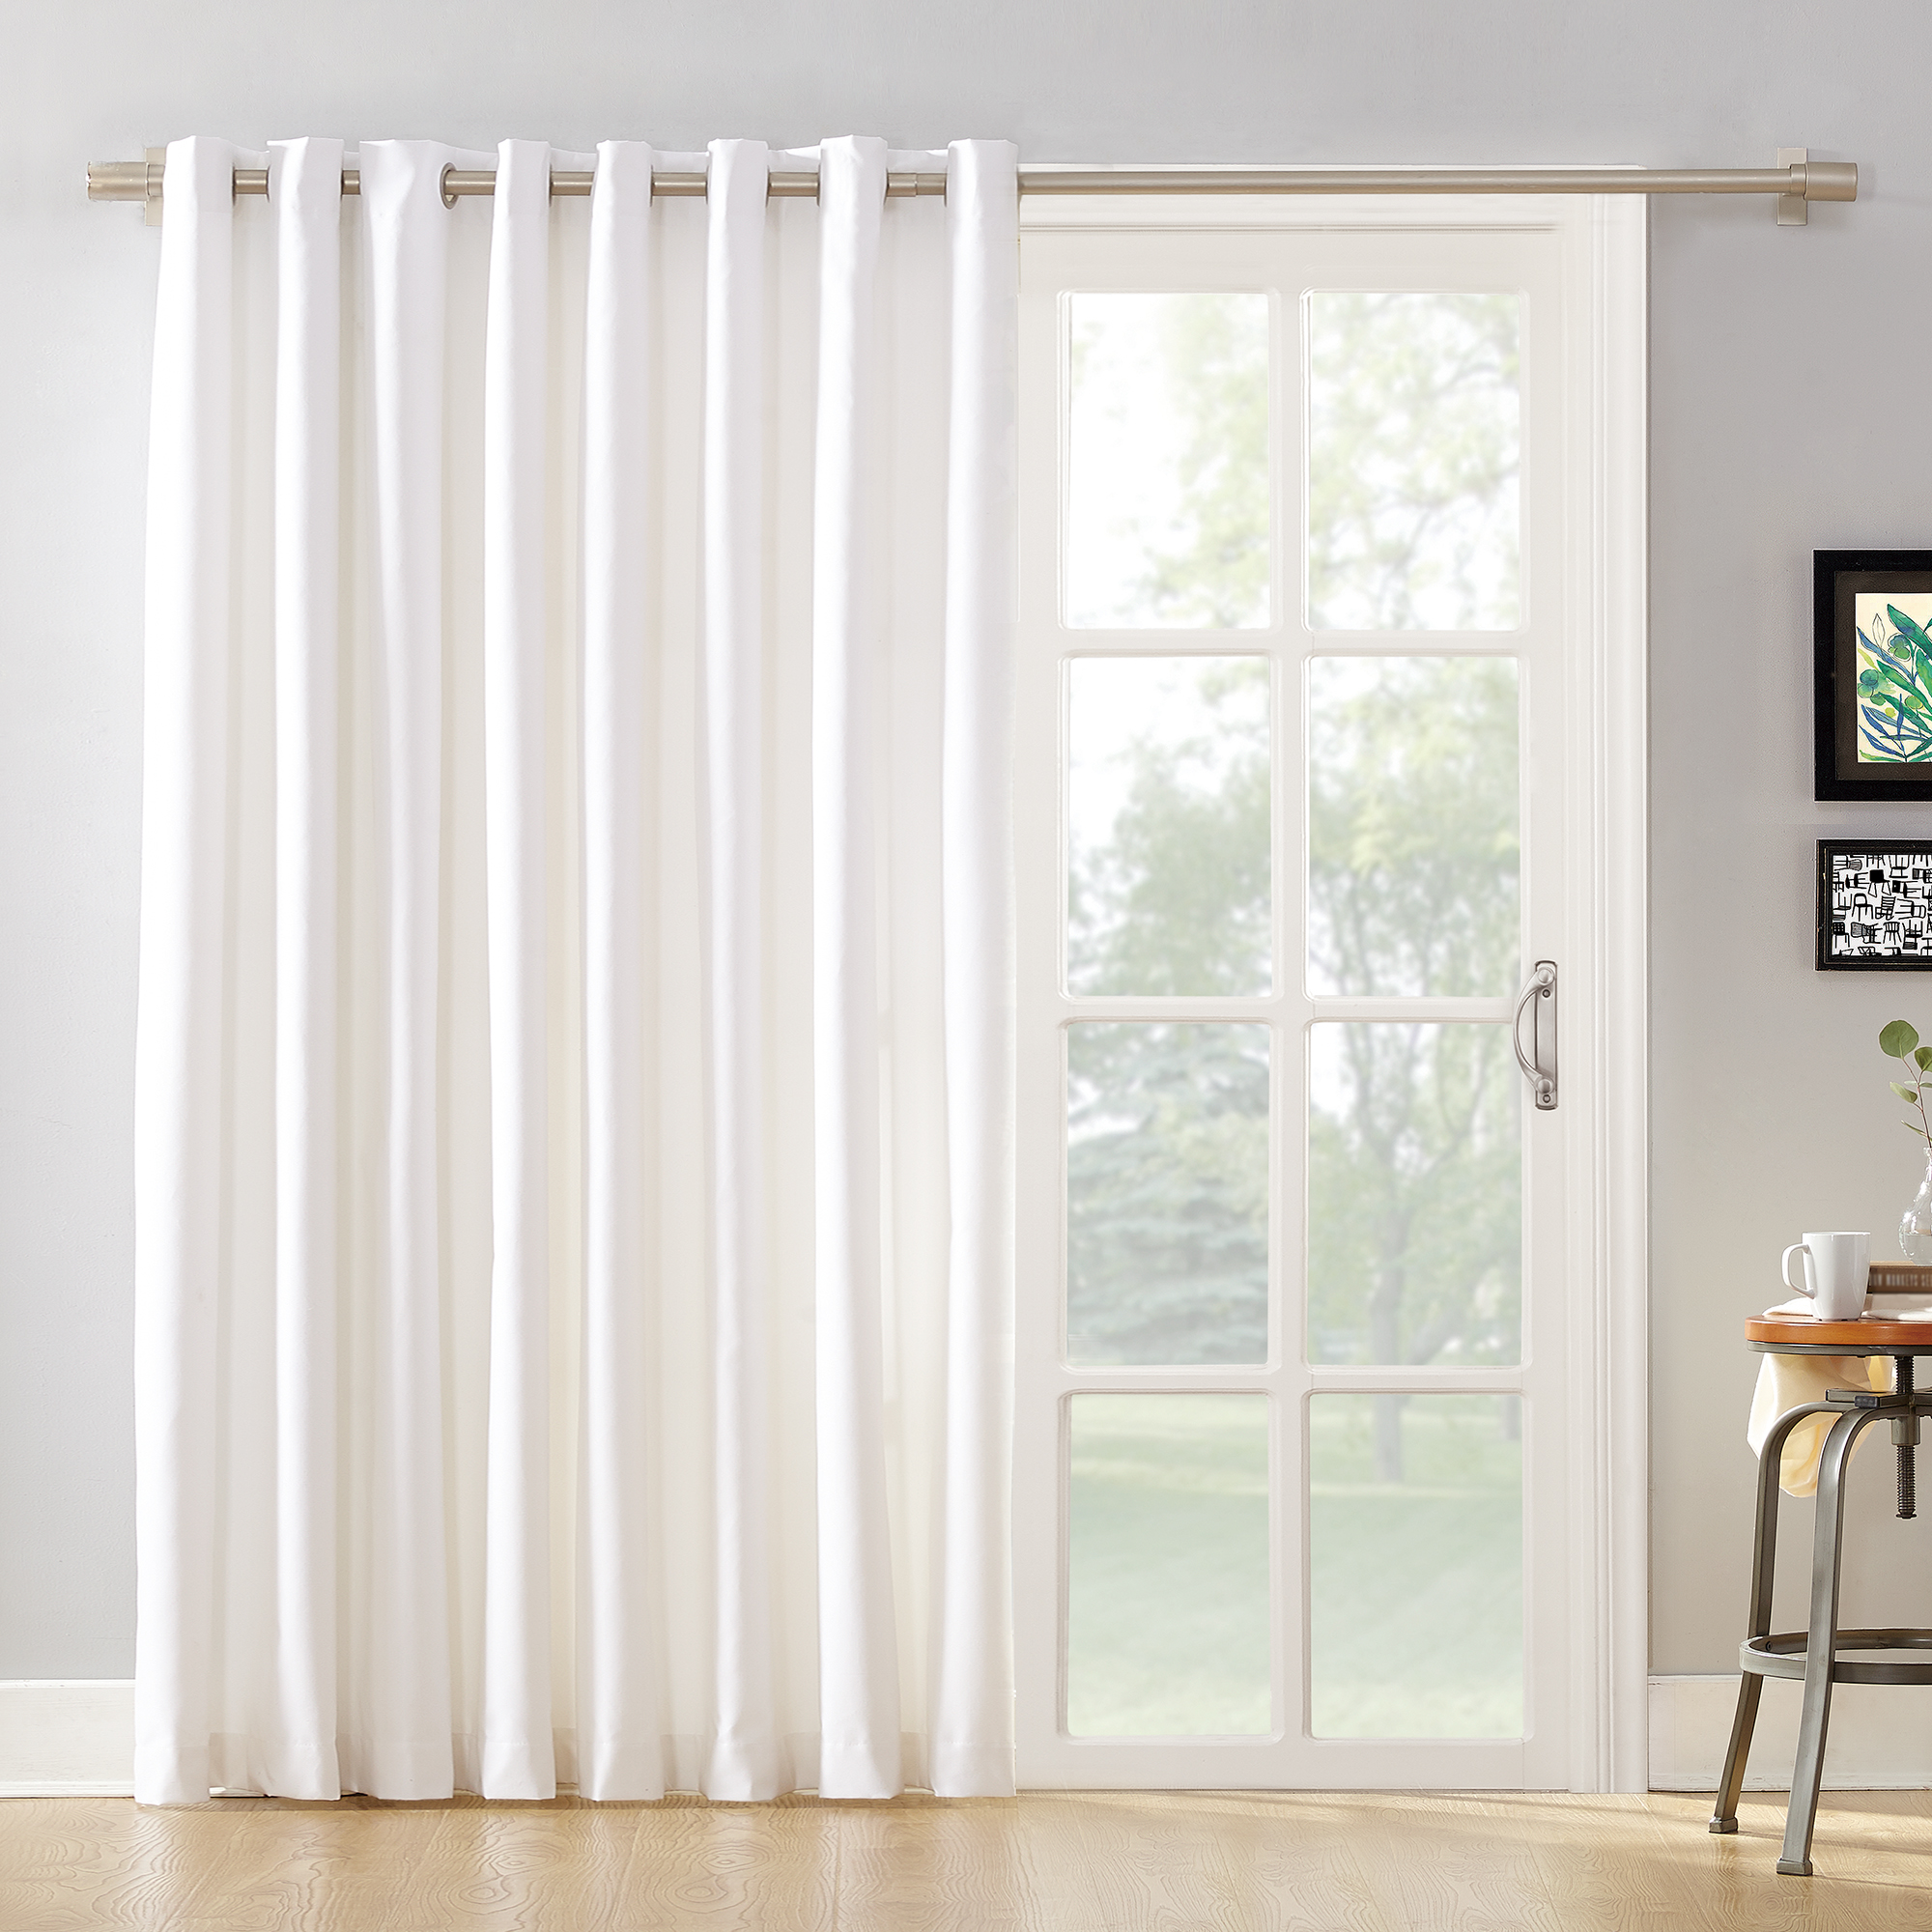 A guide about sliding glass
door curtains